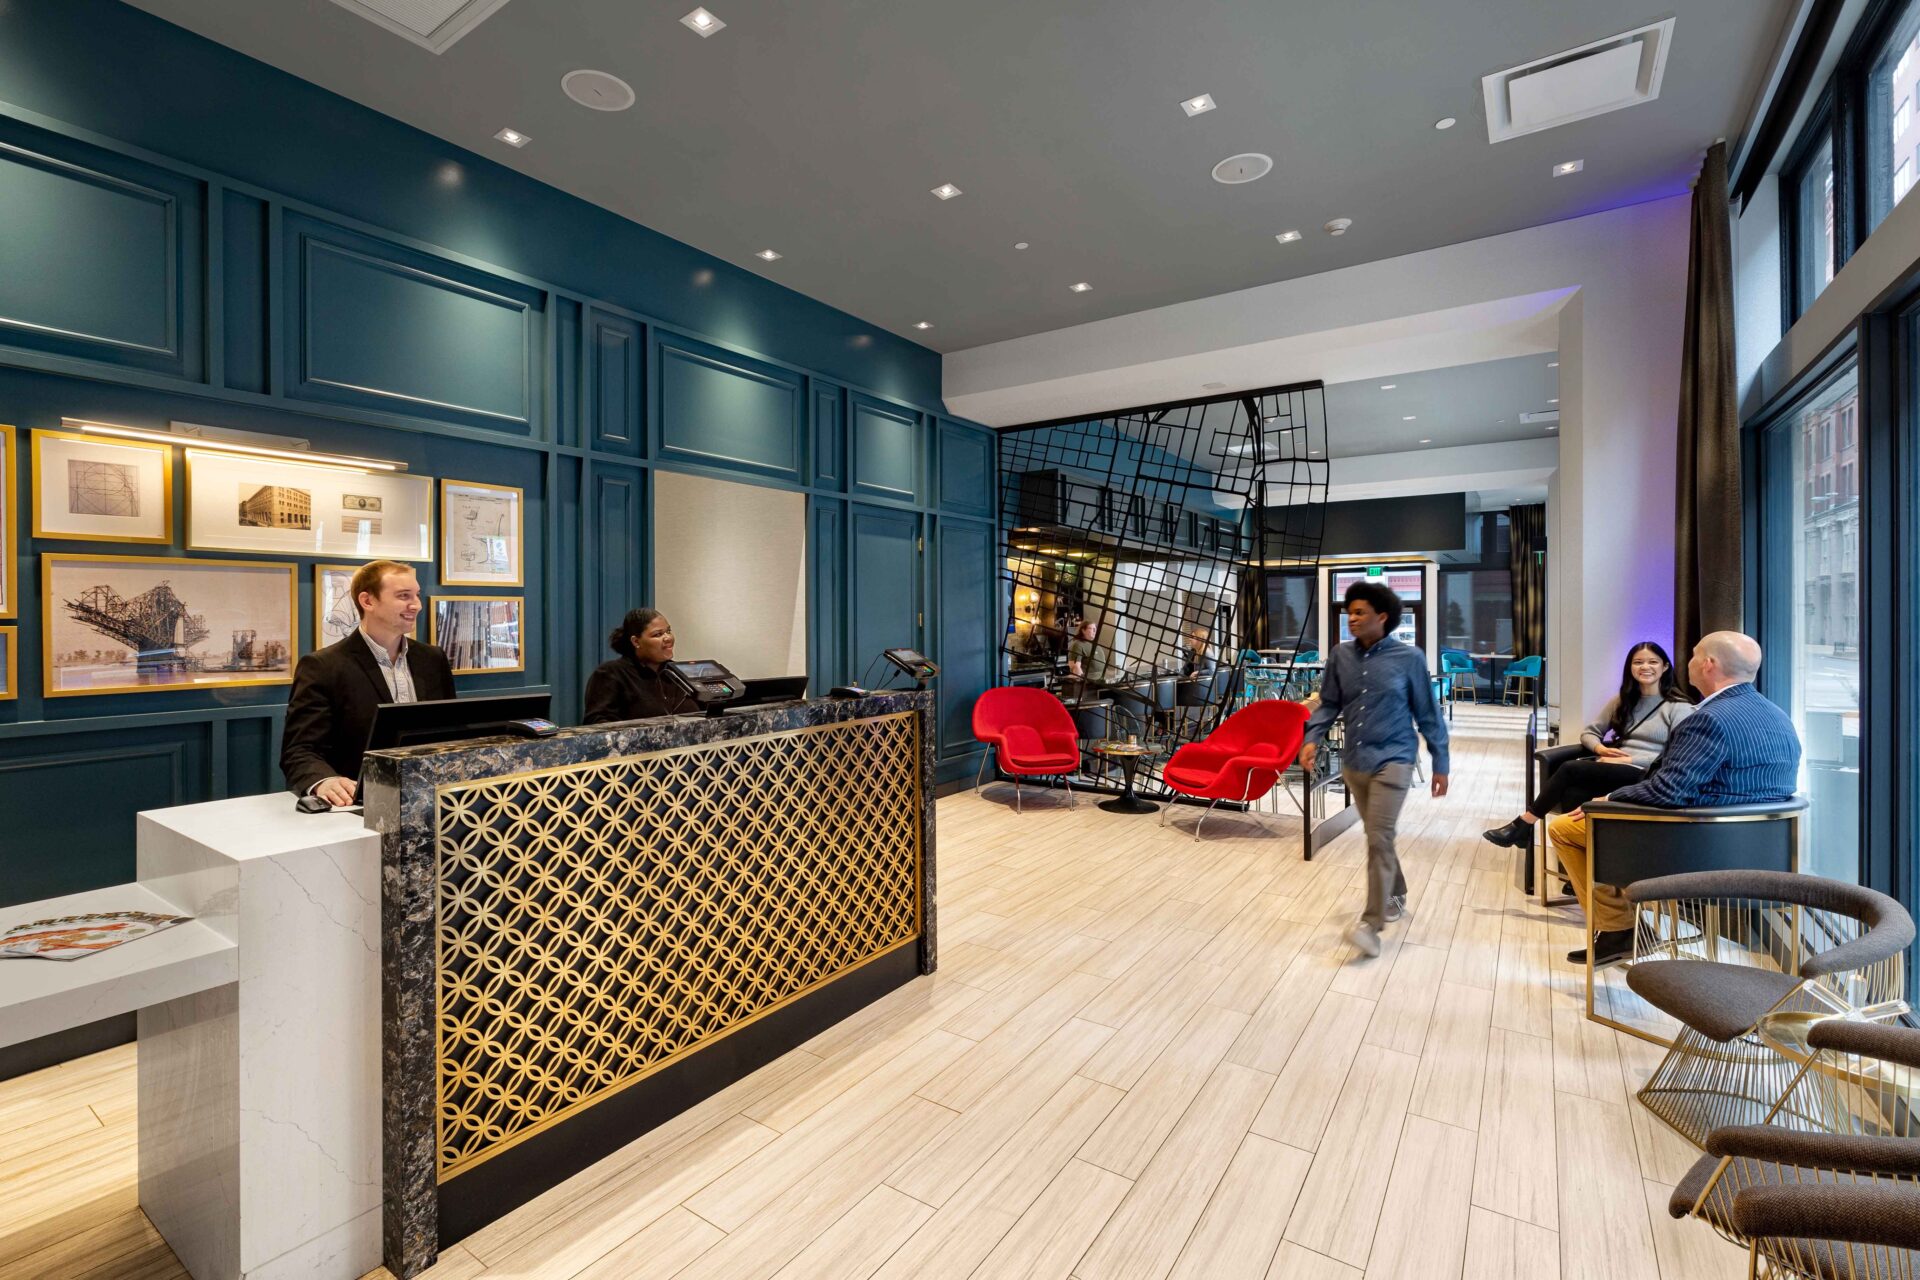 Interior of Lobby Check-in at Hotel Indigo - Designed by Trivers Architectural Firm